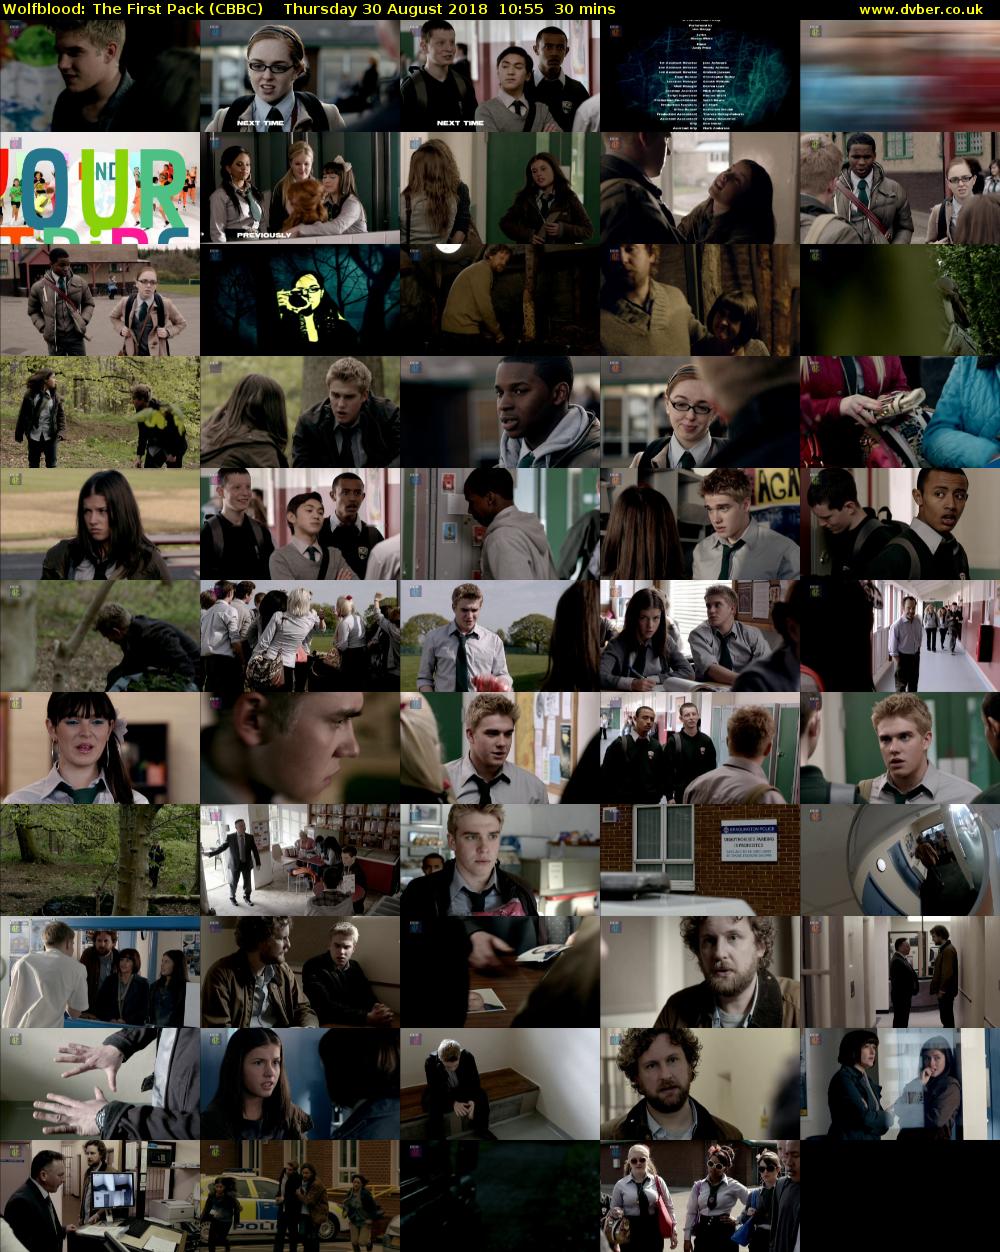 Wolfblood: The First Pack (CBBC) Thursday 30 August 2018 10:55 - 11:25